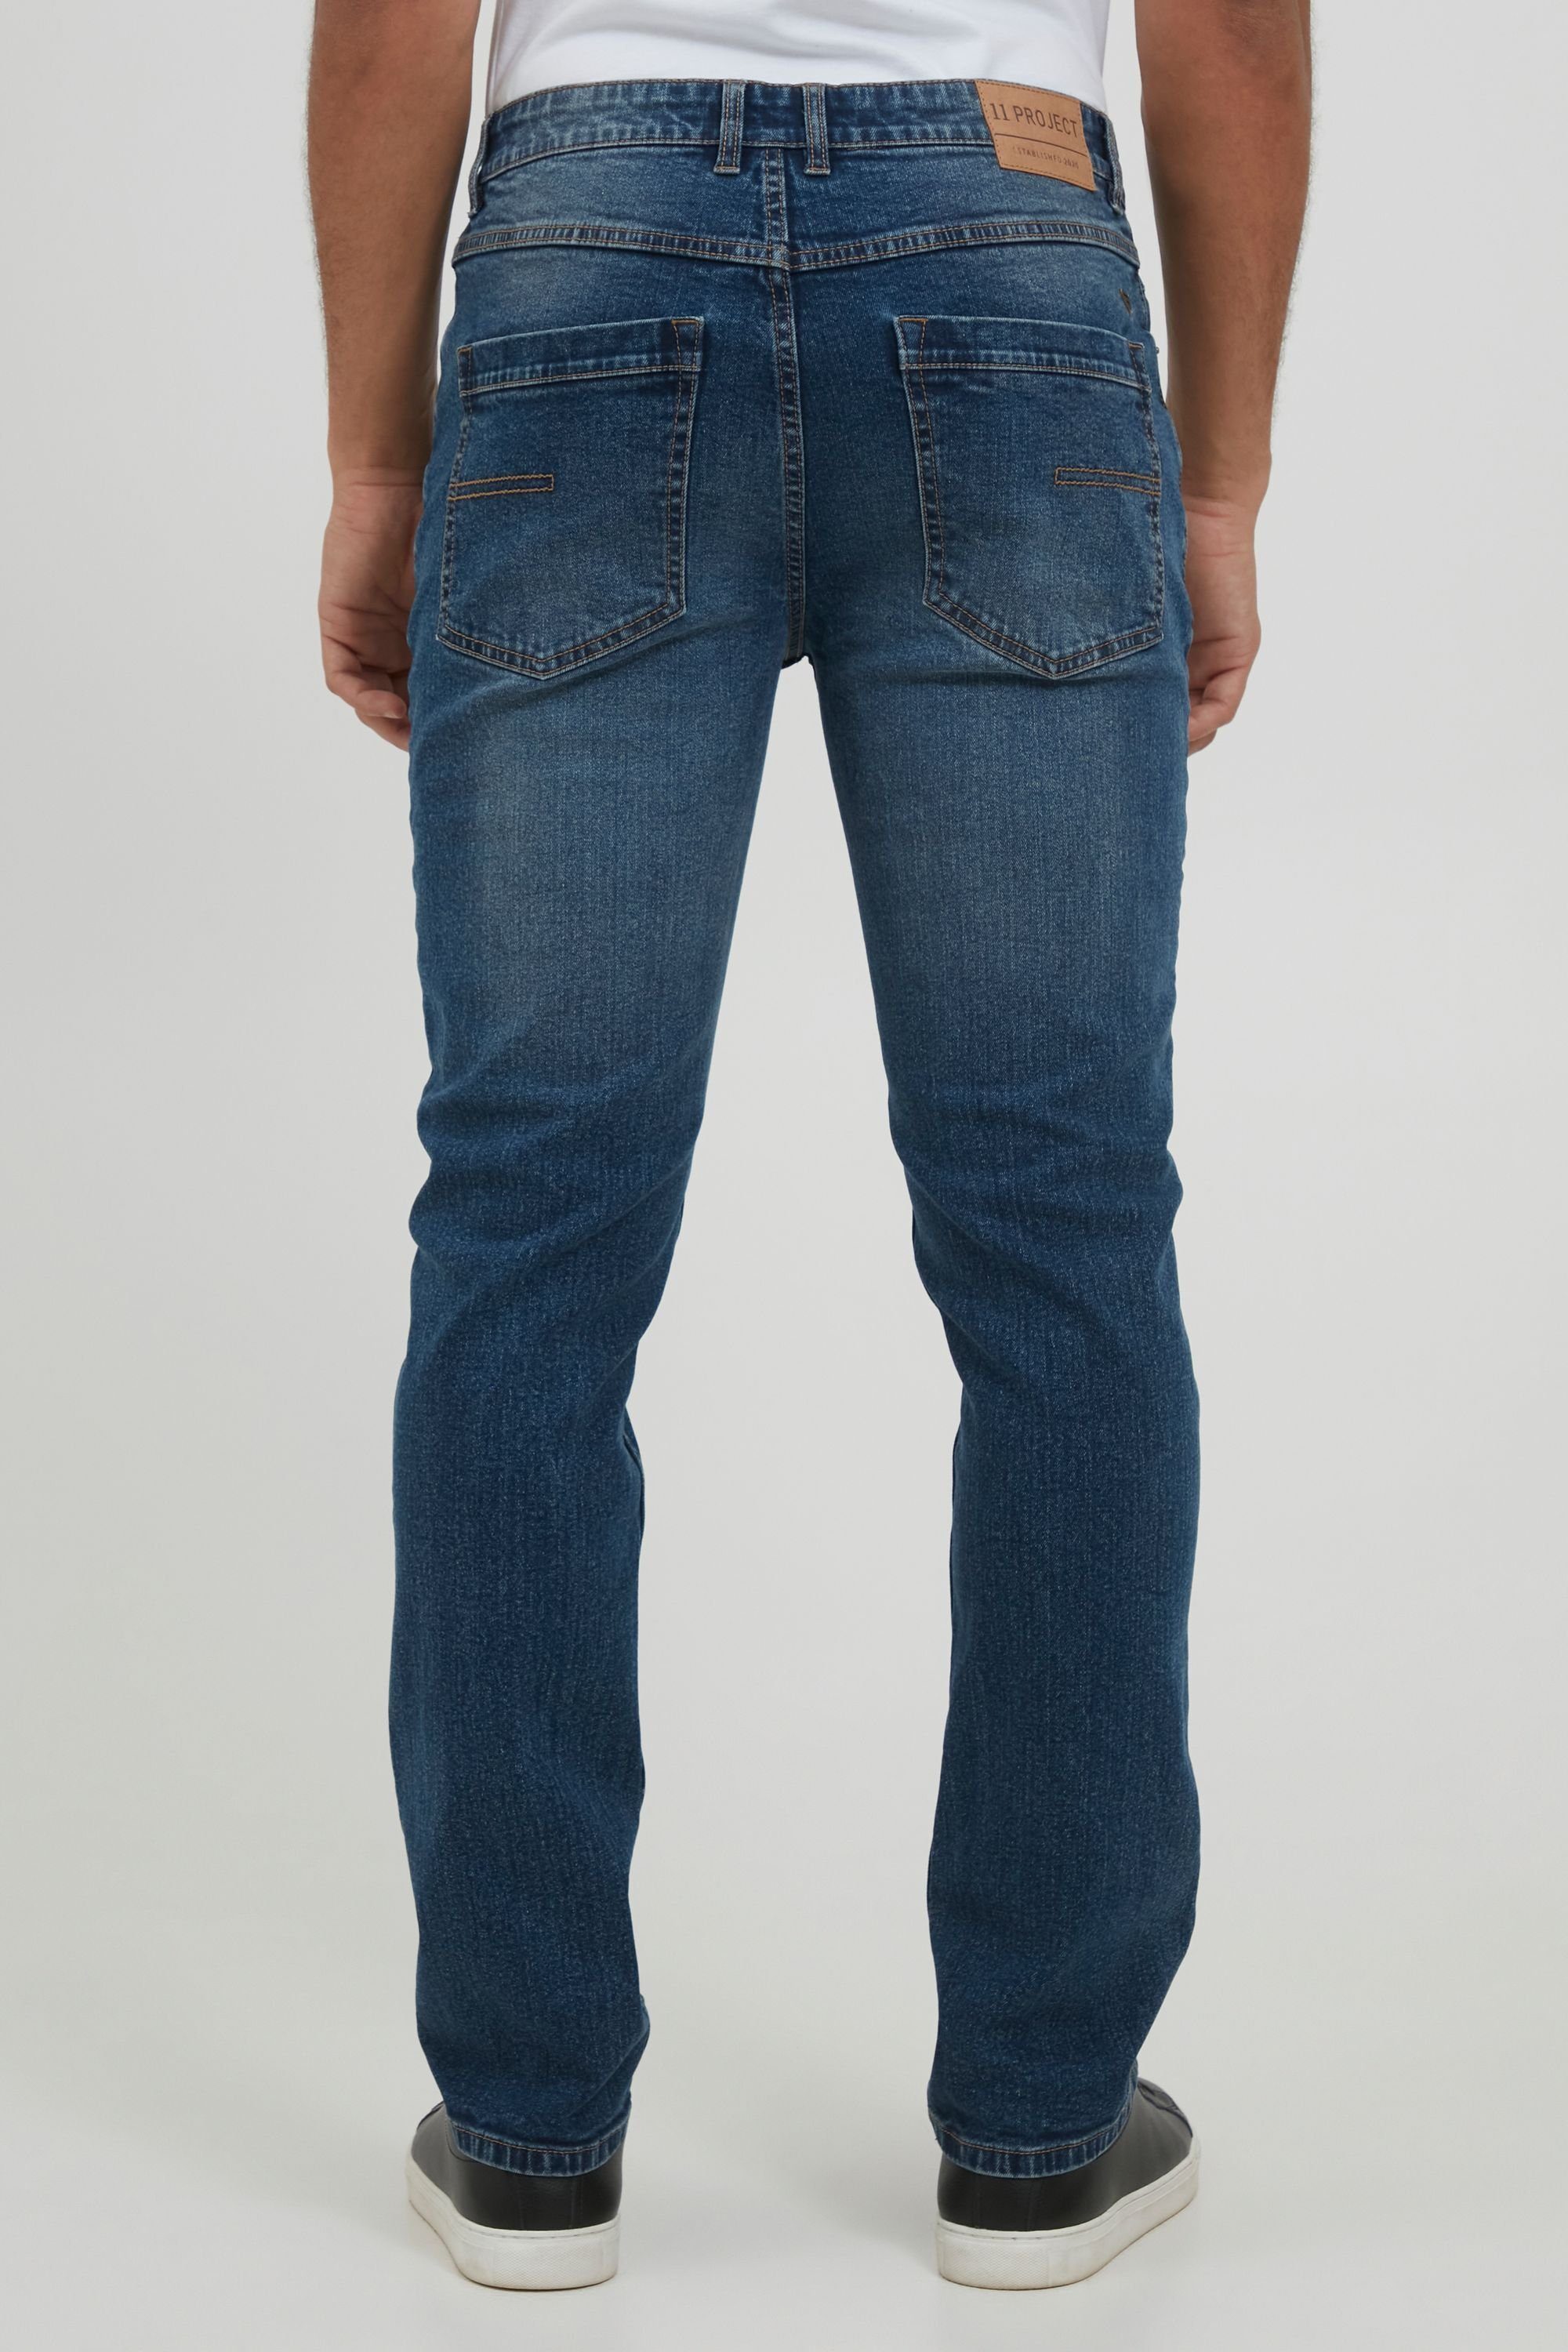 Project 5-Pocket-Jeans PRBettino 11 Blue Middle Denim 11 Project